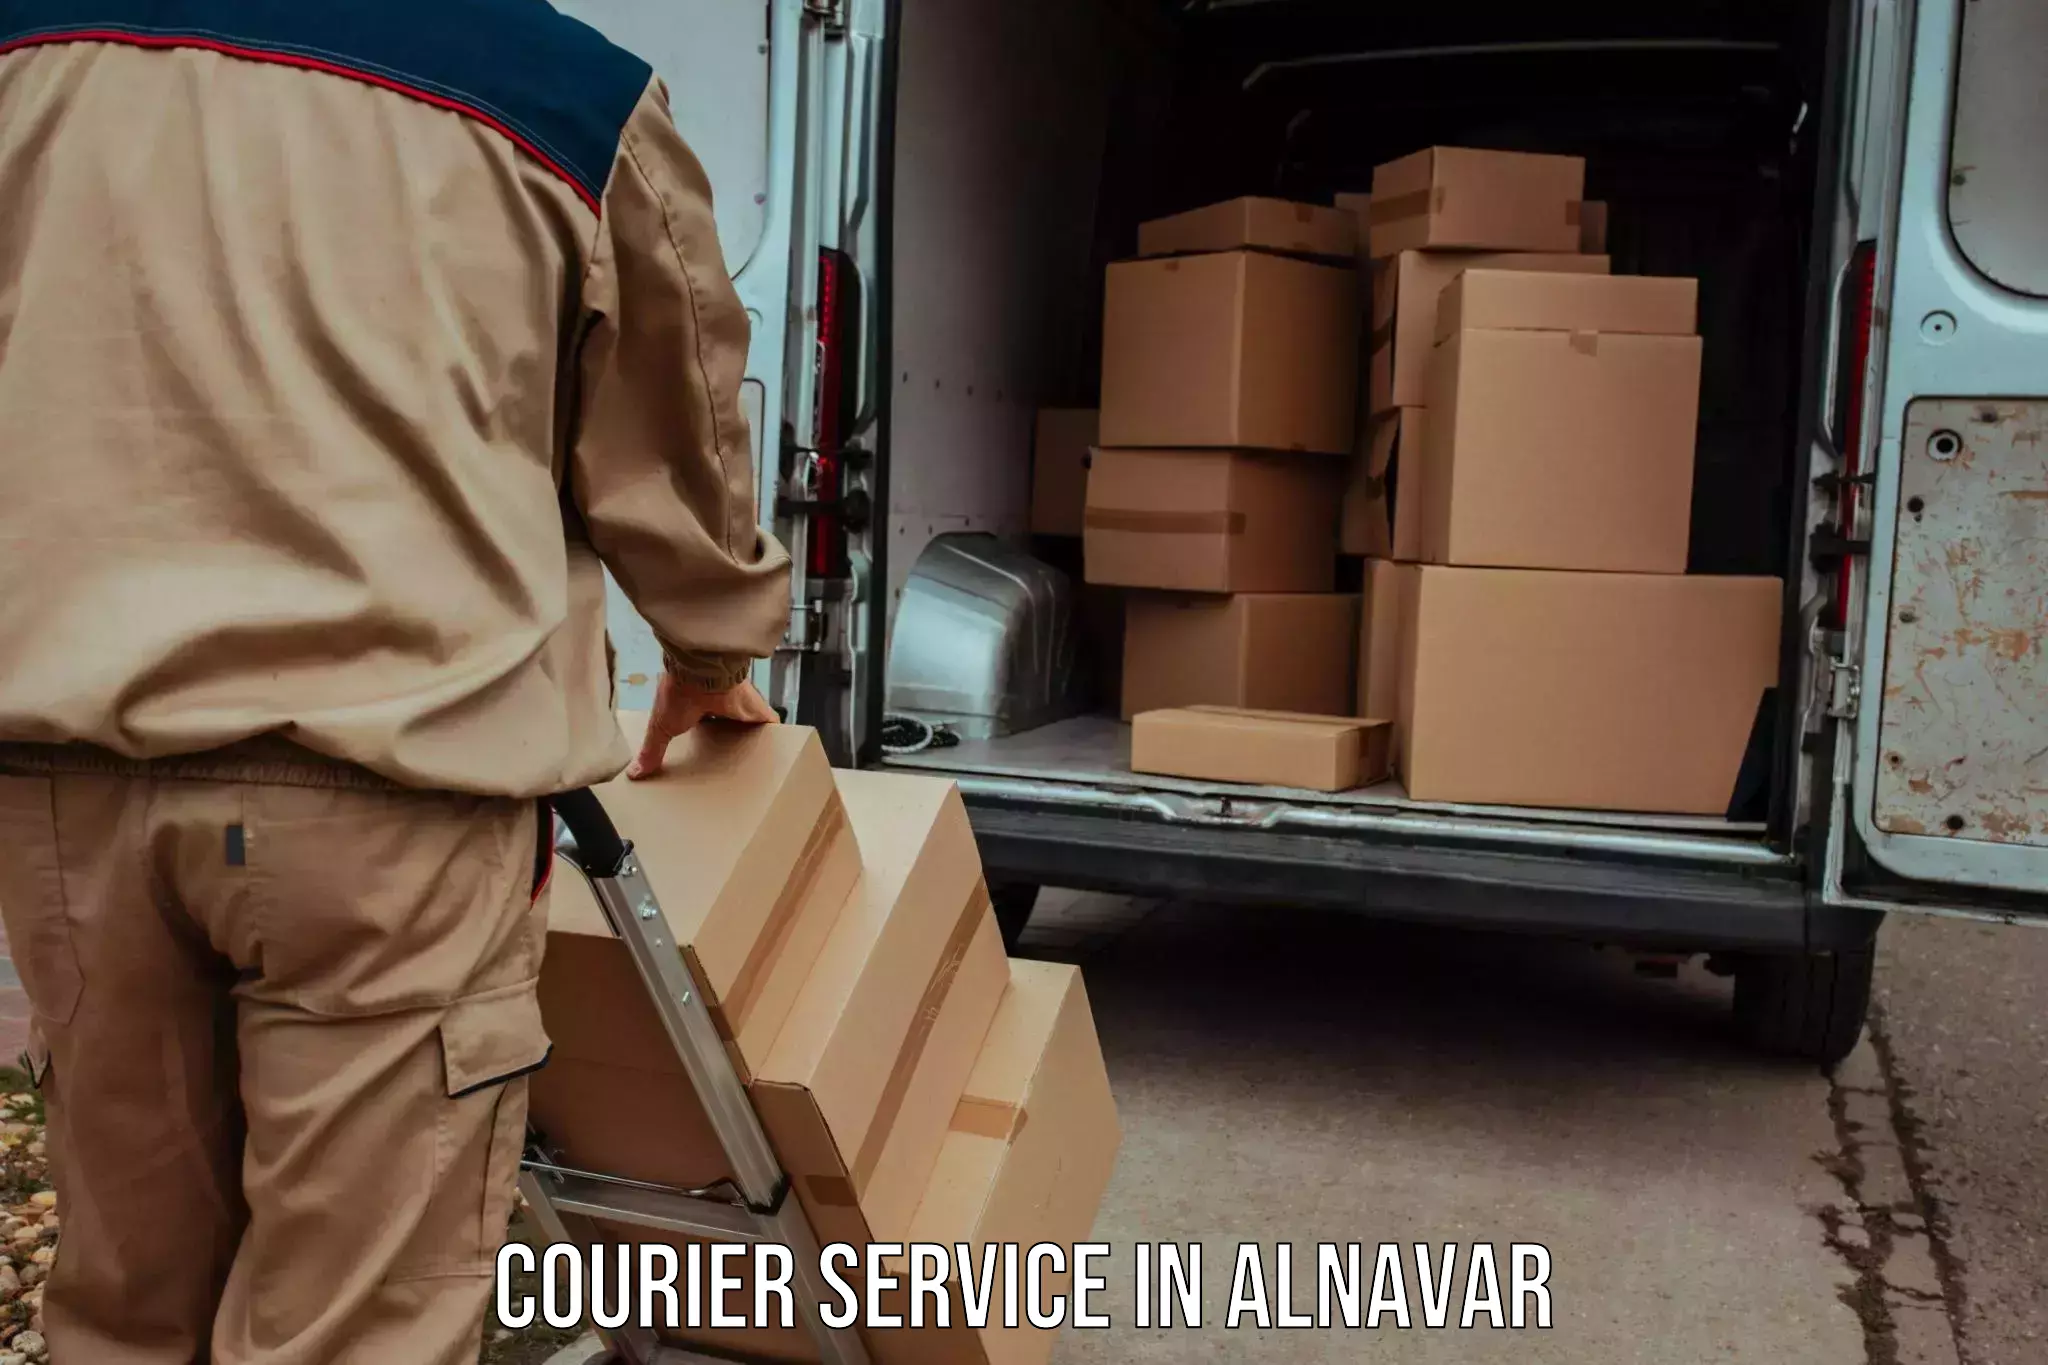 Customer-oriented courier services in Alnavar